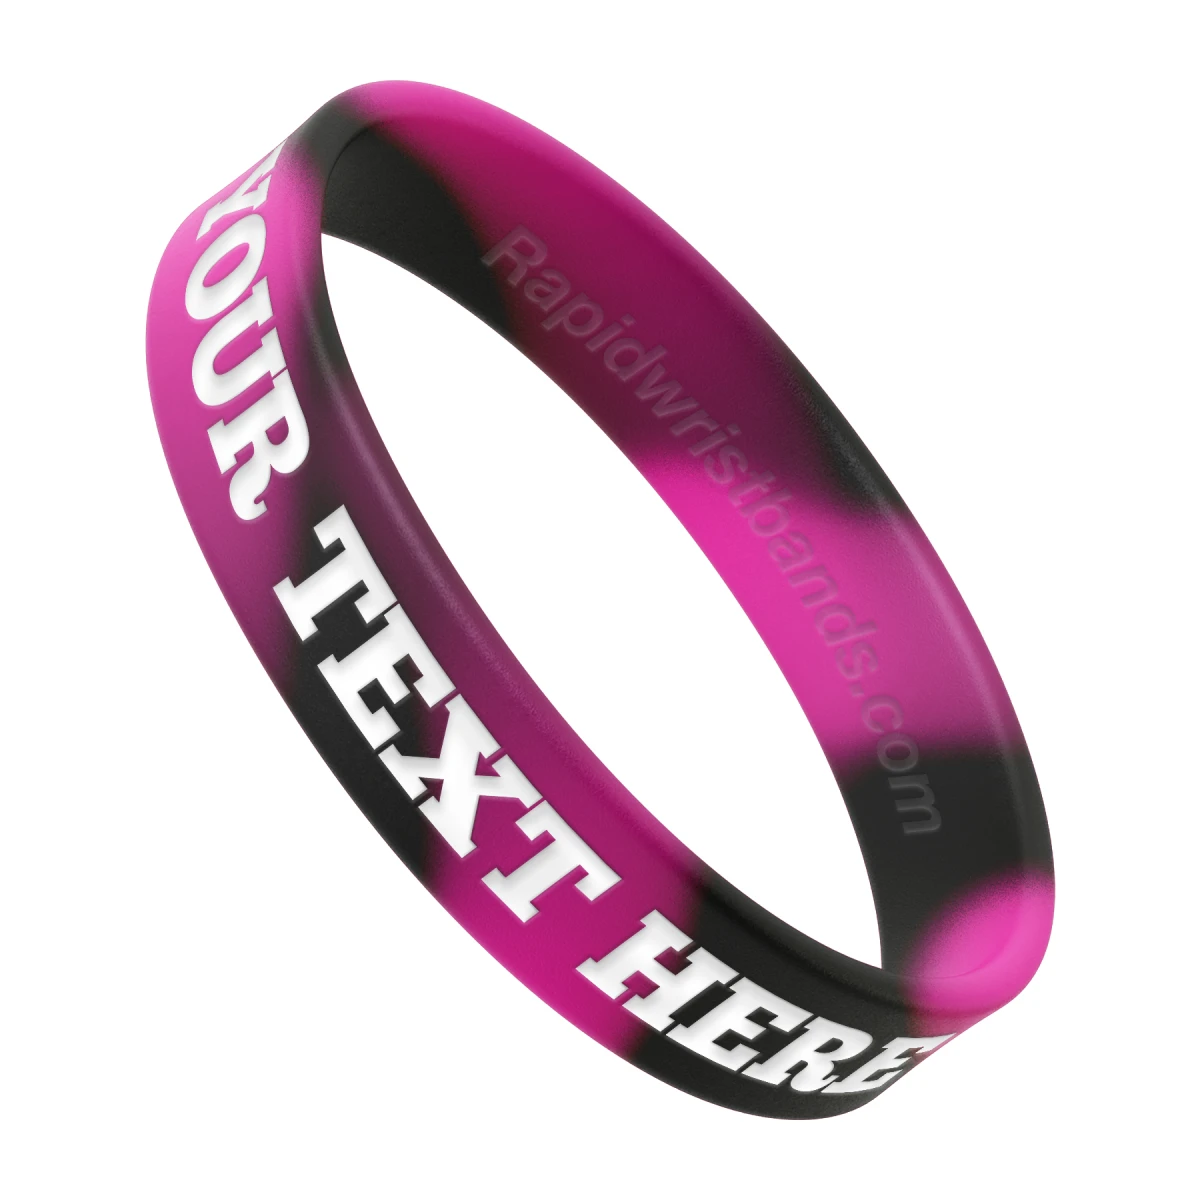 Swirl Black/Hot Pink Wristband With Your Text Here Engraved In White